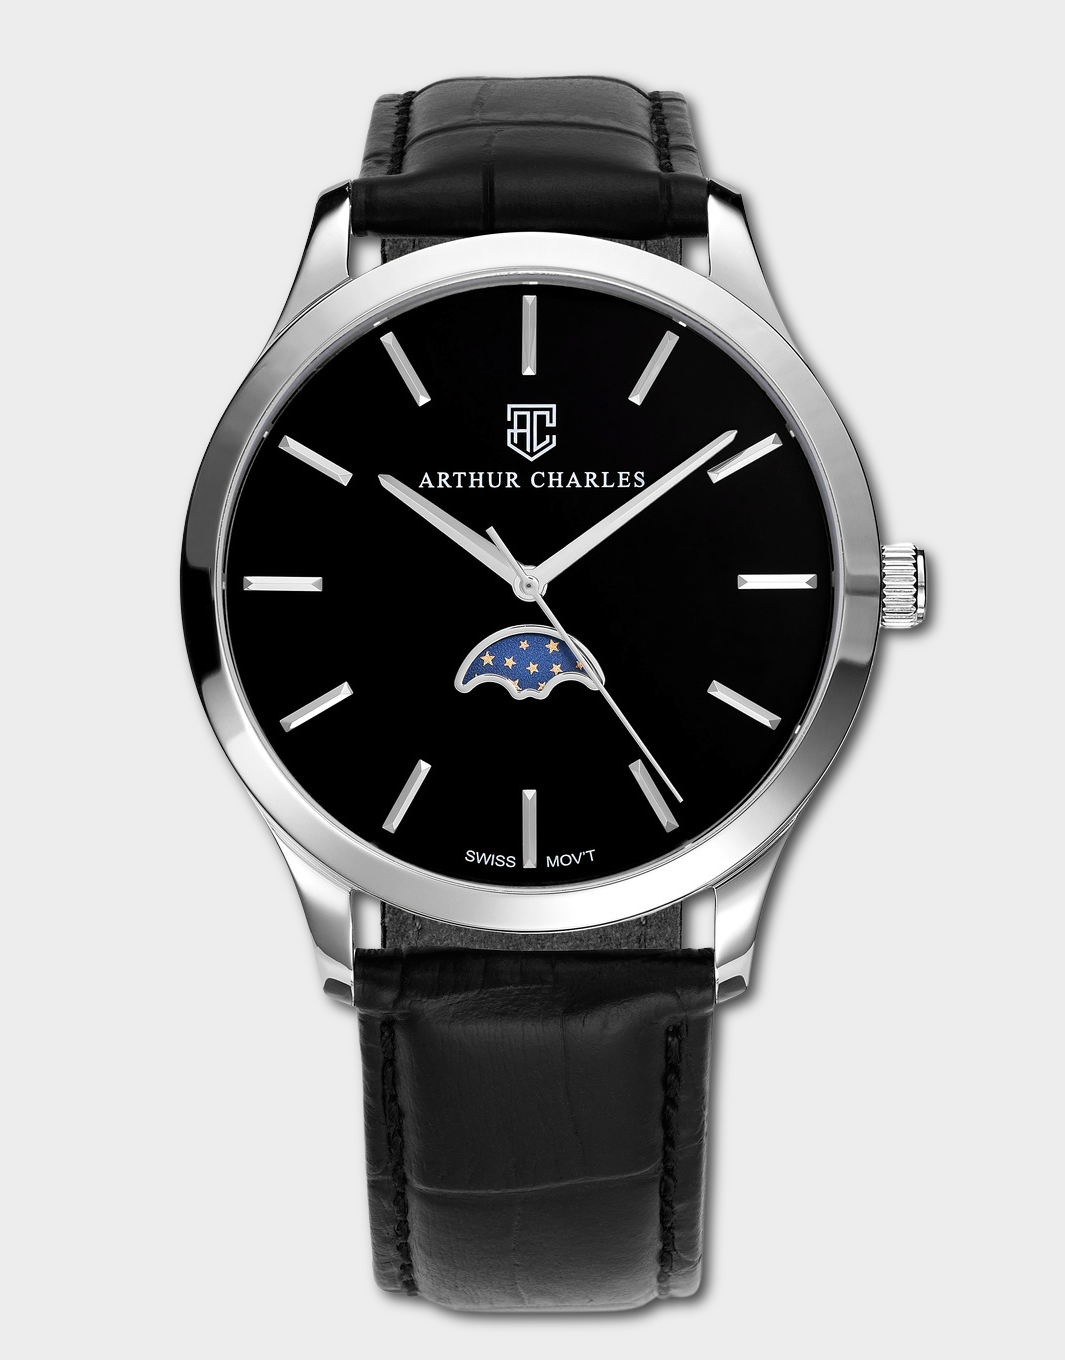 Front view of the Black Moonphase Watch sold by Arthur Charles Watches. This watch has a black leather butterfly clasp strap and black dial with silver hands and indices. This watch features a moonphase indicator and also uses swiss movement.